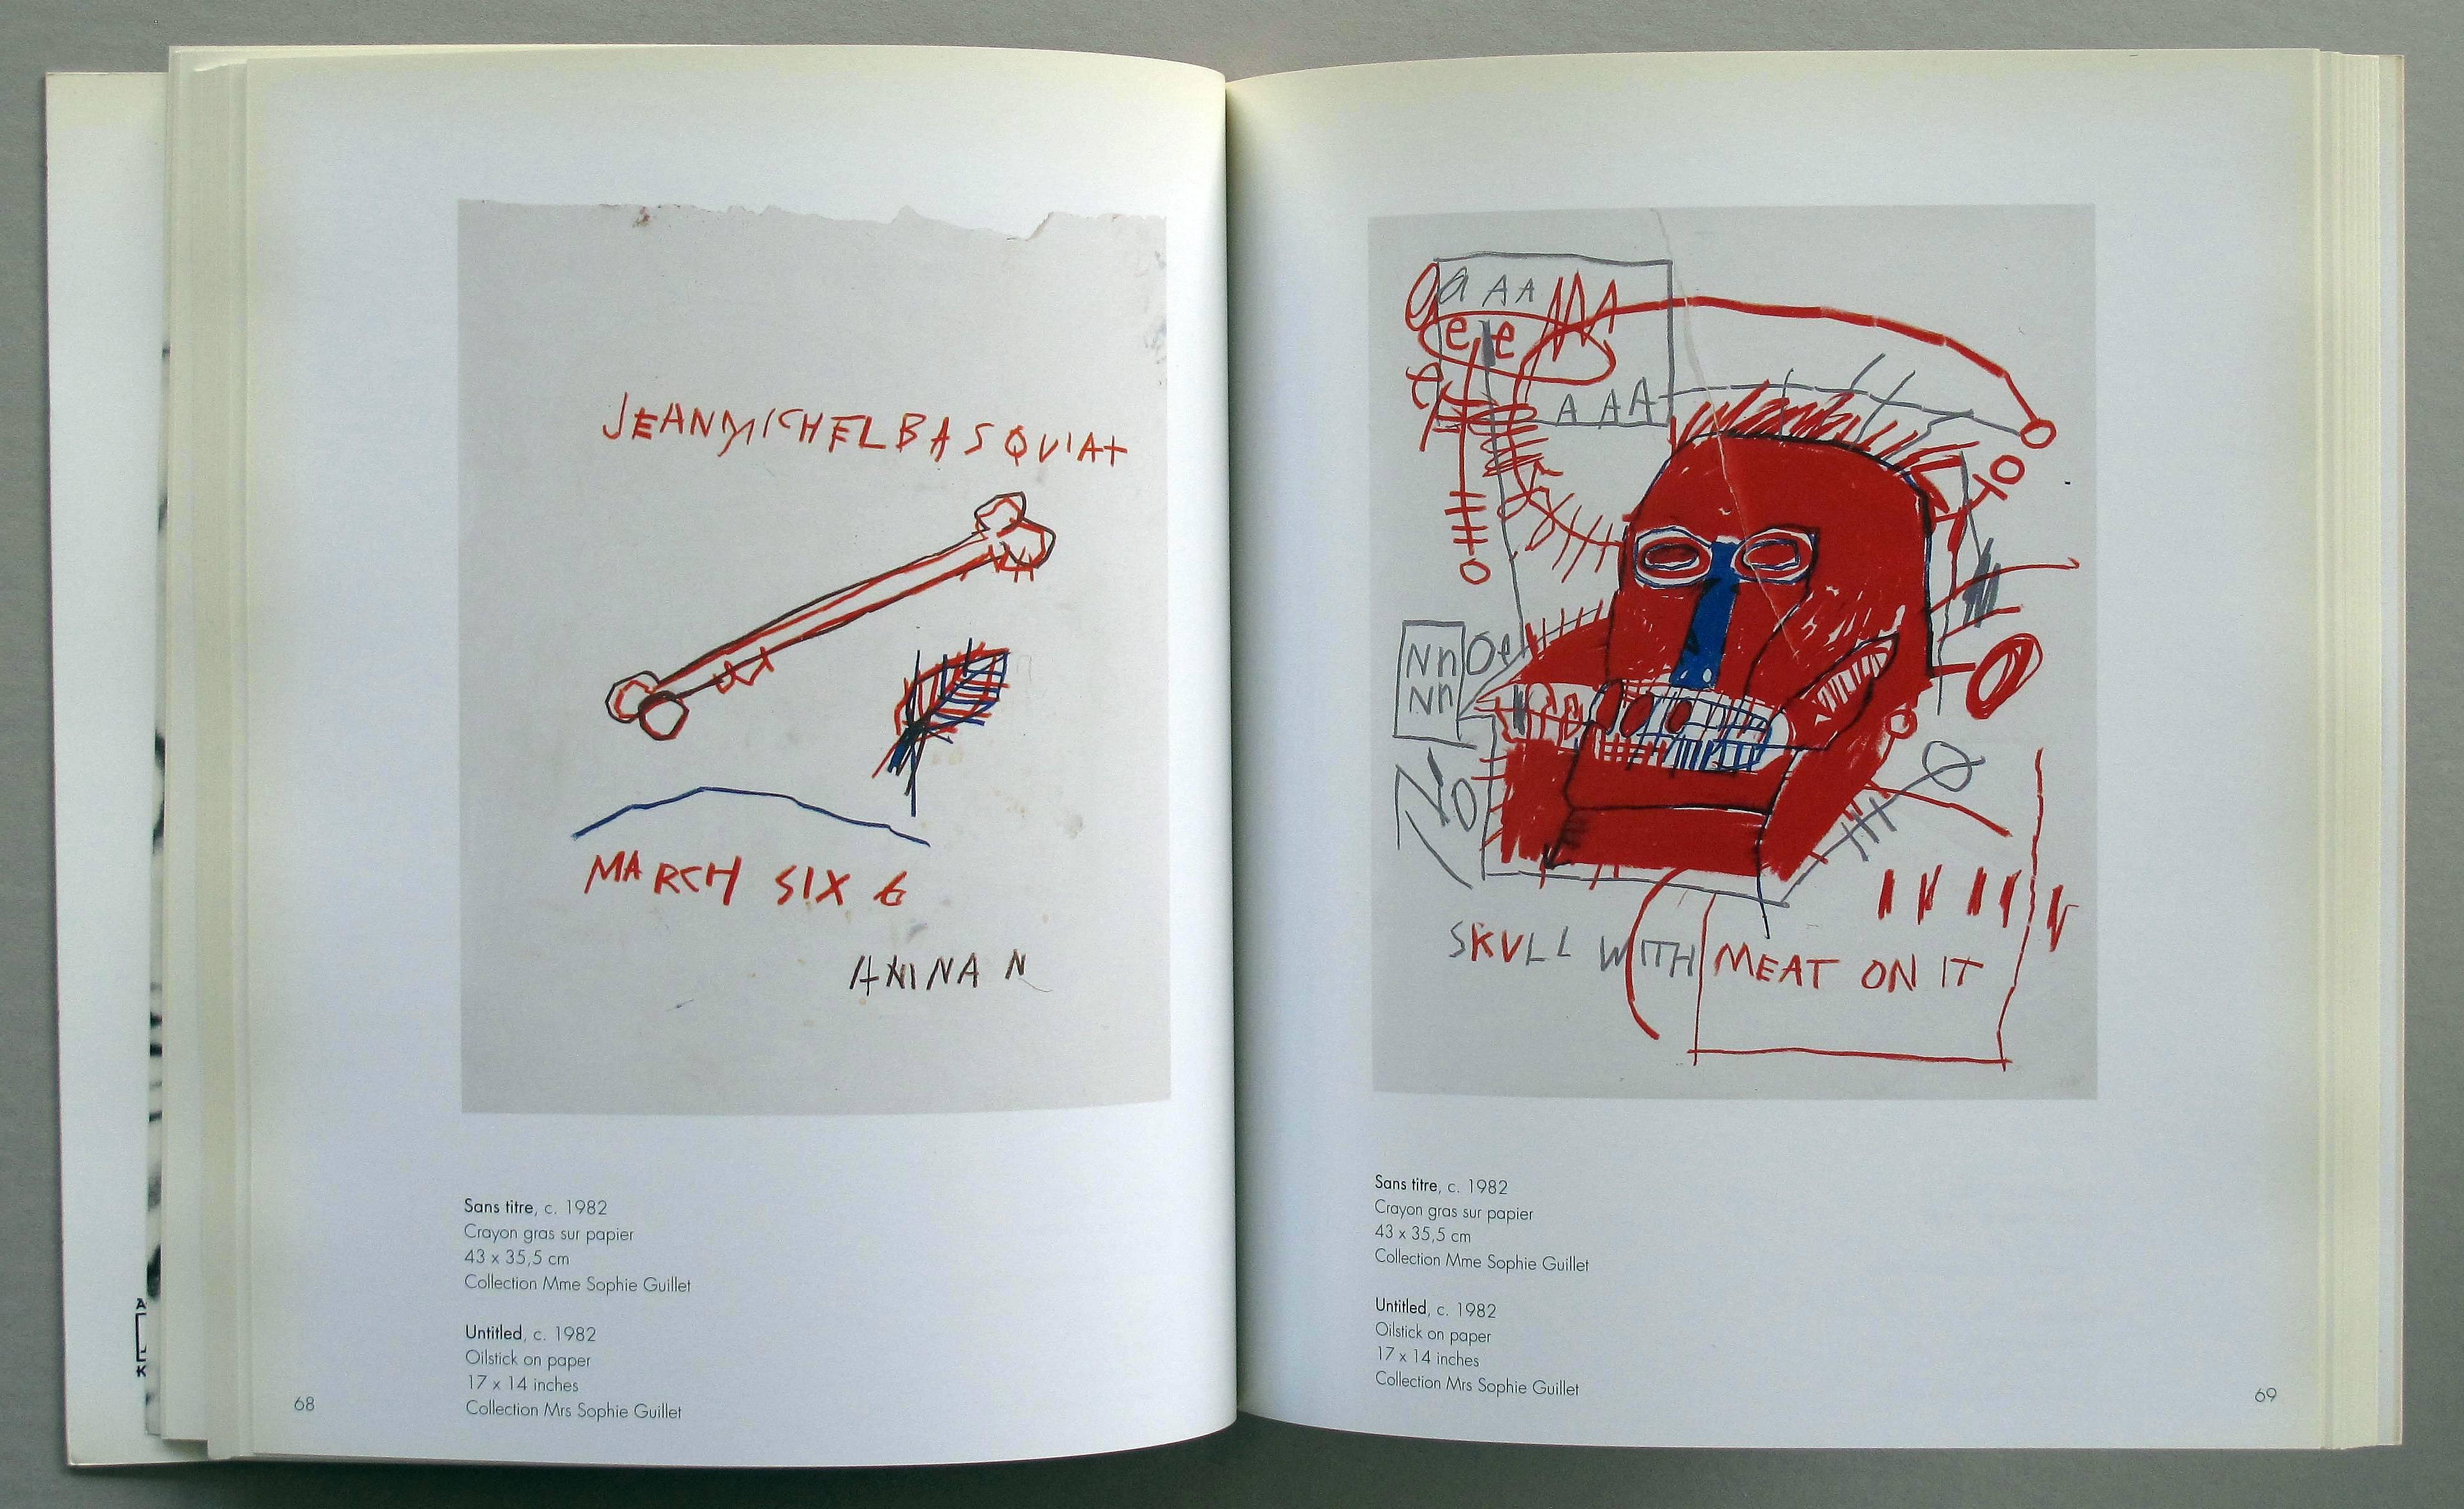 Basquiat Réunion des Musées Nationaux exhibition catalog, 1997
An elaborate catalog of Basquiat drawings and works on paper published in 1997 by Réunion des Musées Nationaux, France. Features 85 beautifully illustrated color reproductions plus